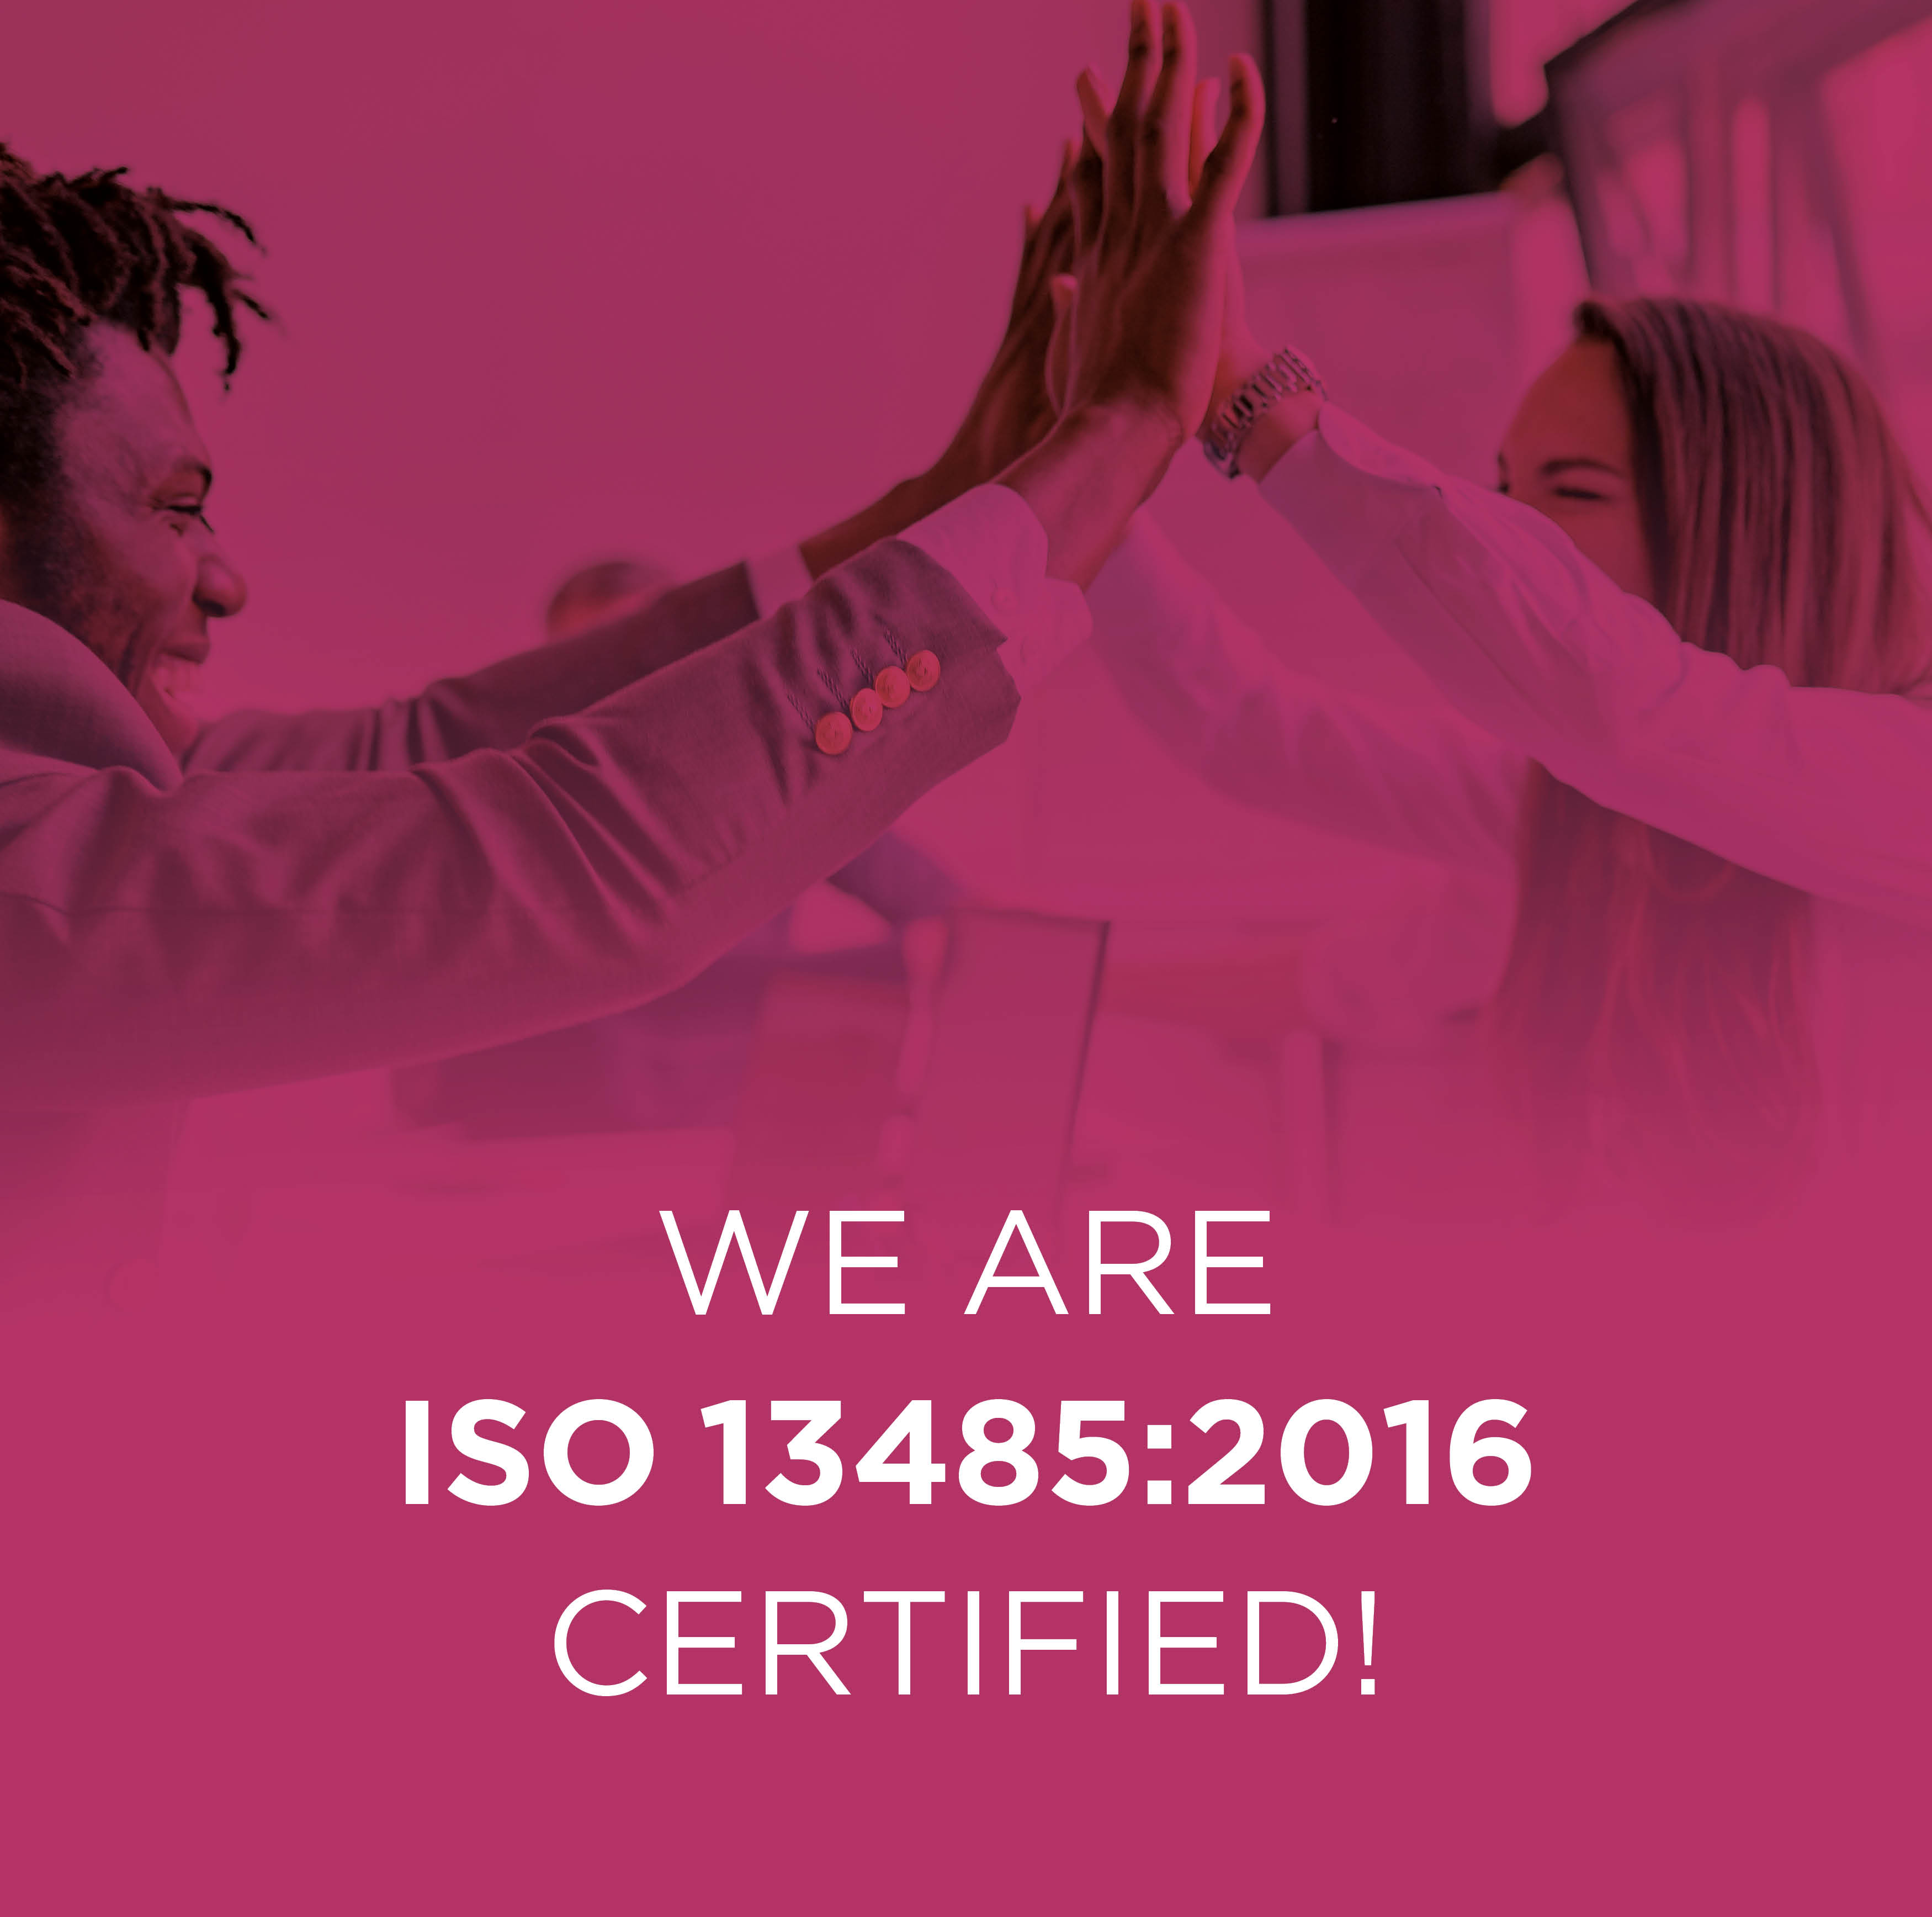 ISO 13485:2016 Certification Announcement